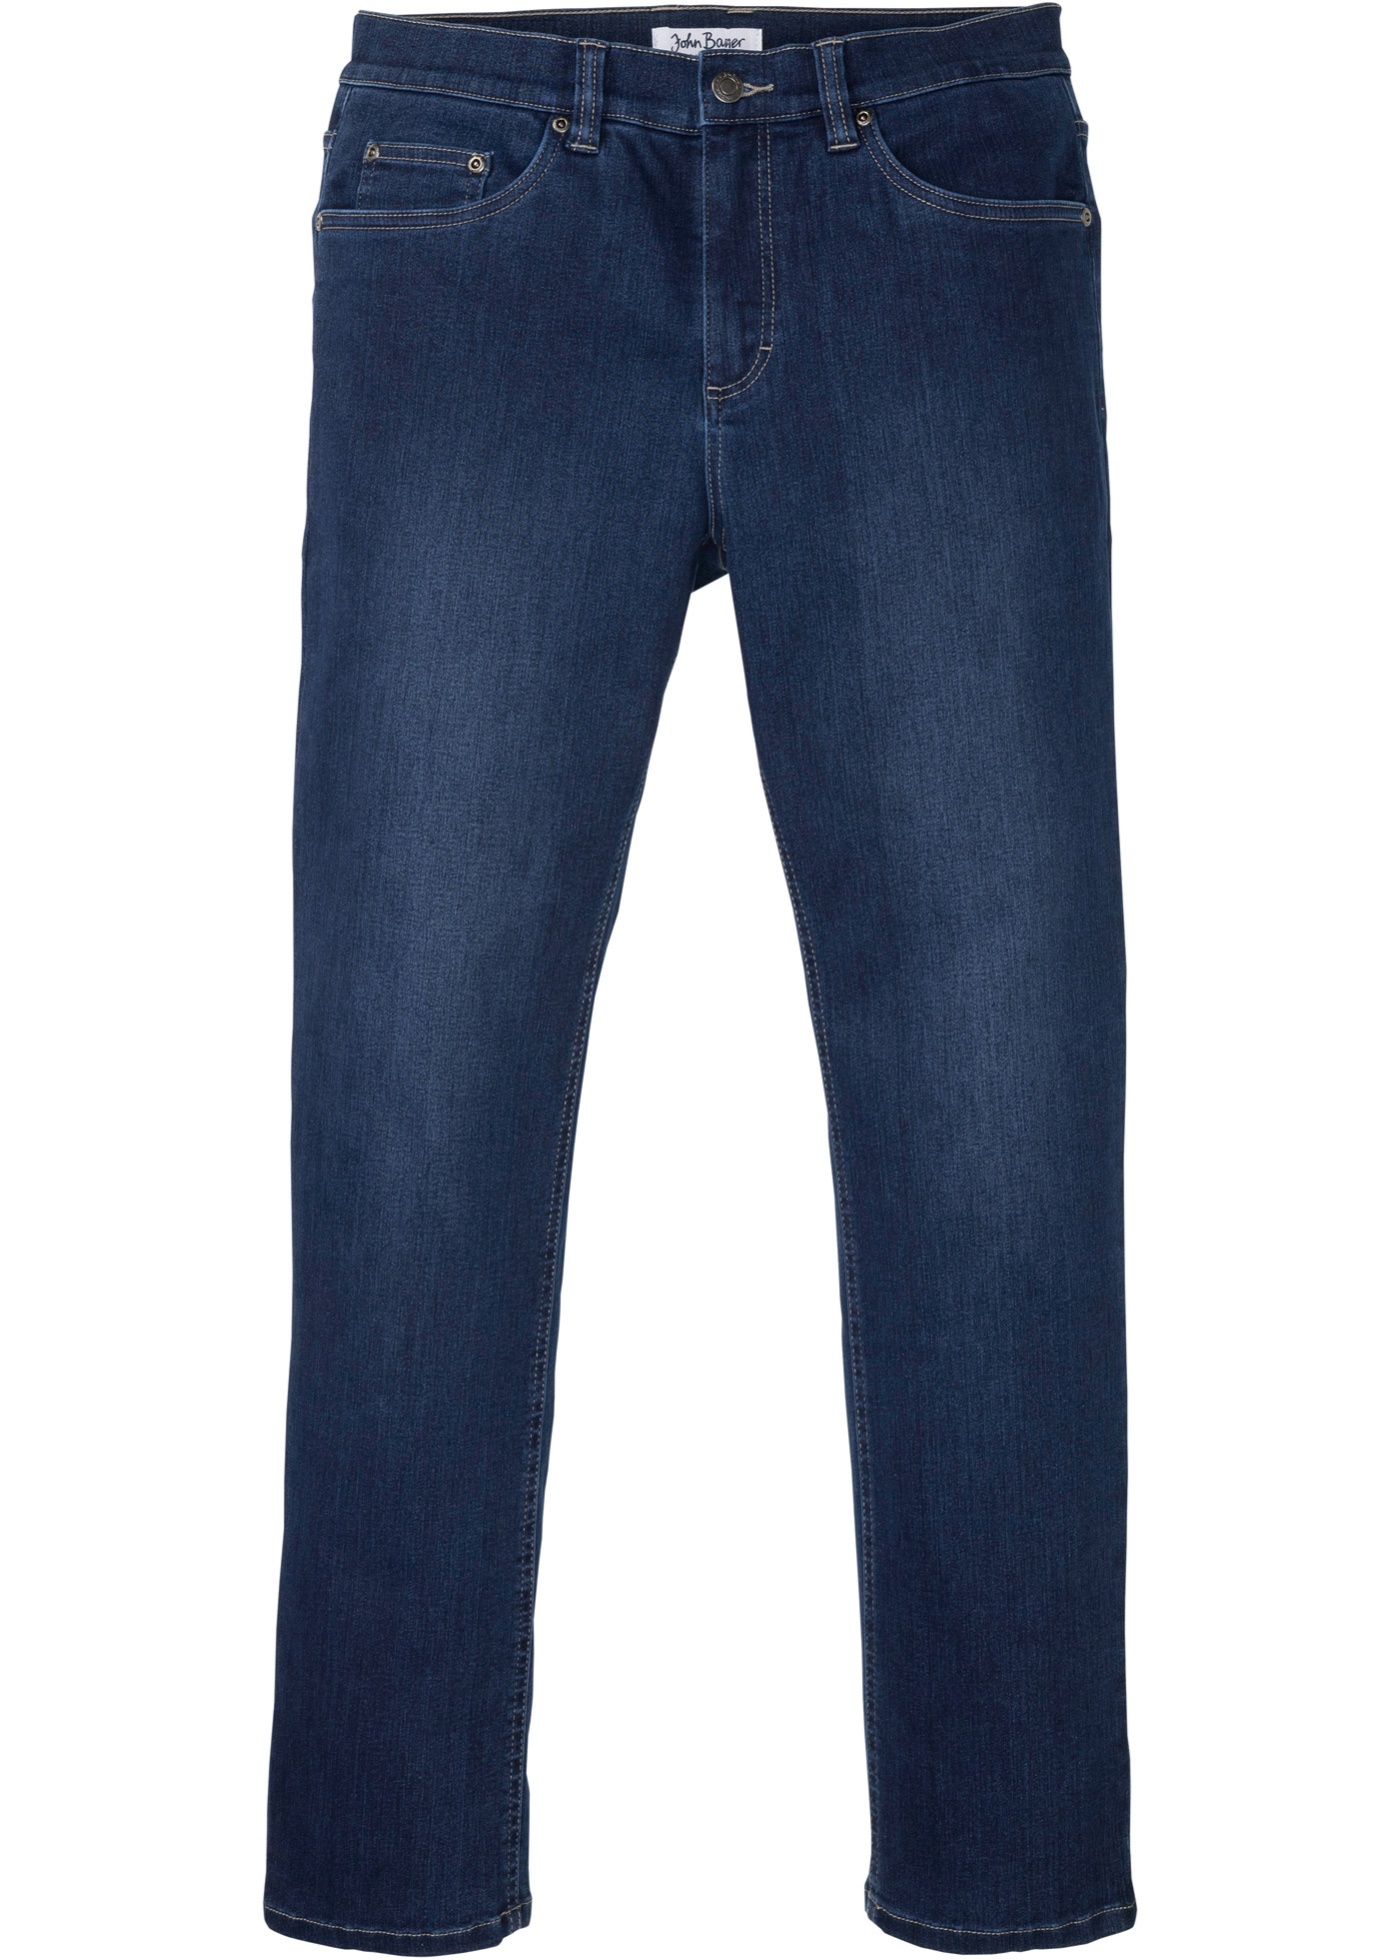 Classic fit ultra soft jeans, straight